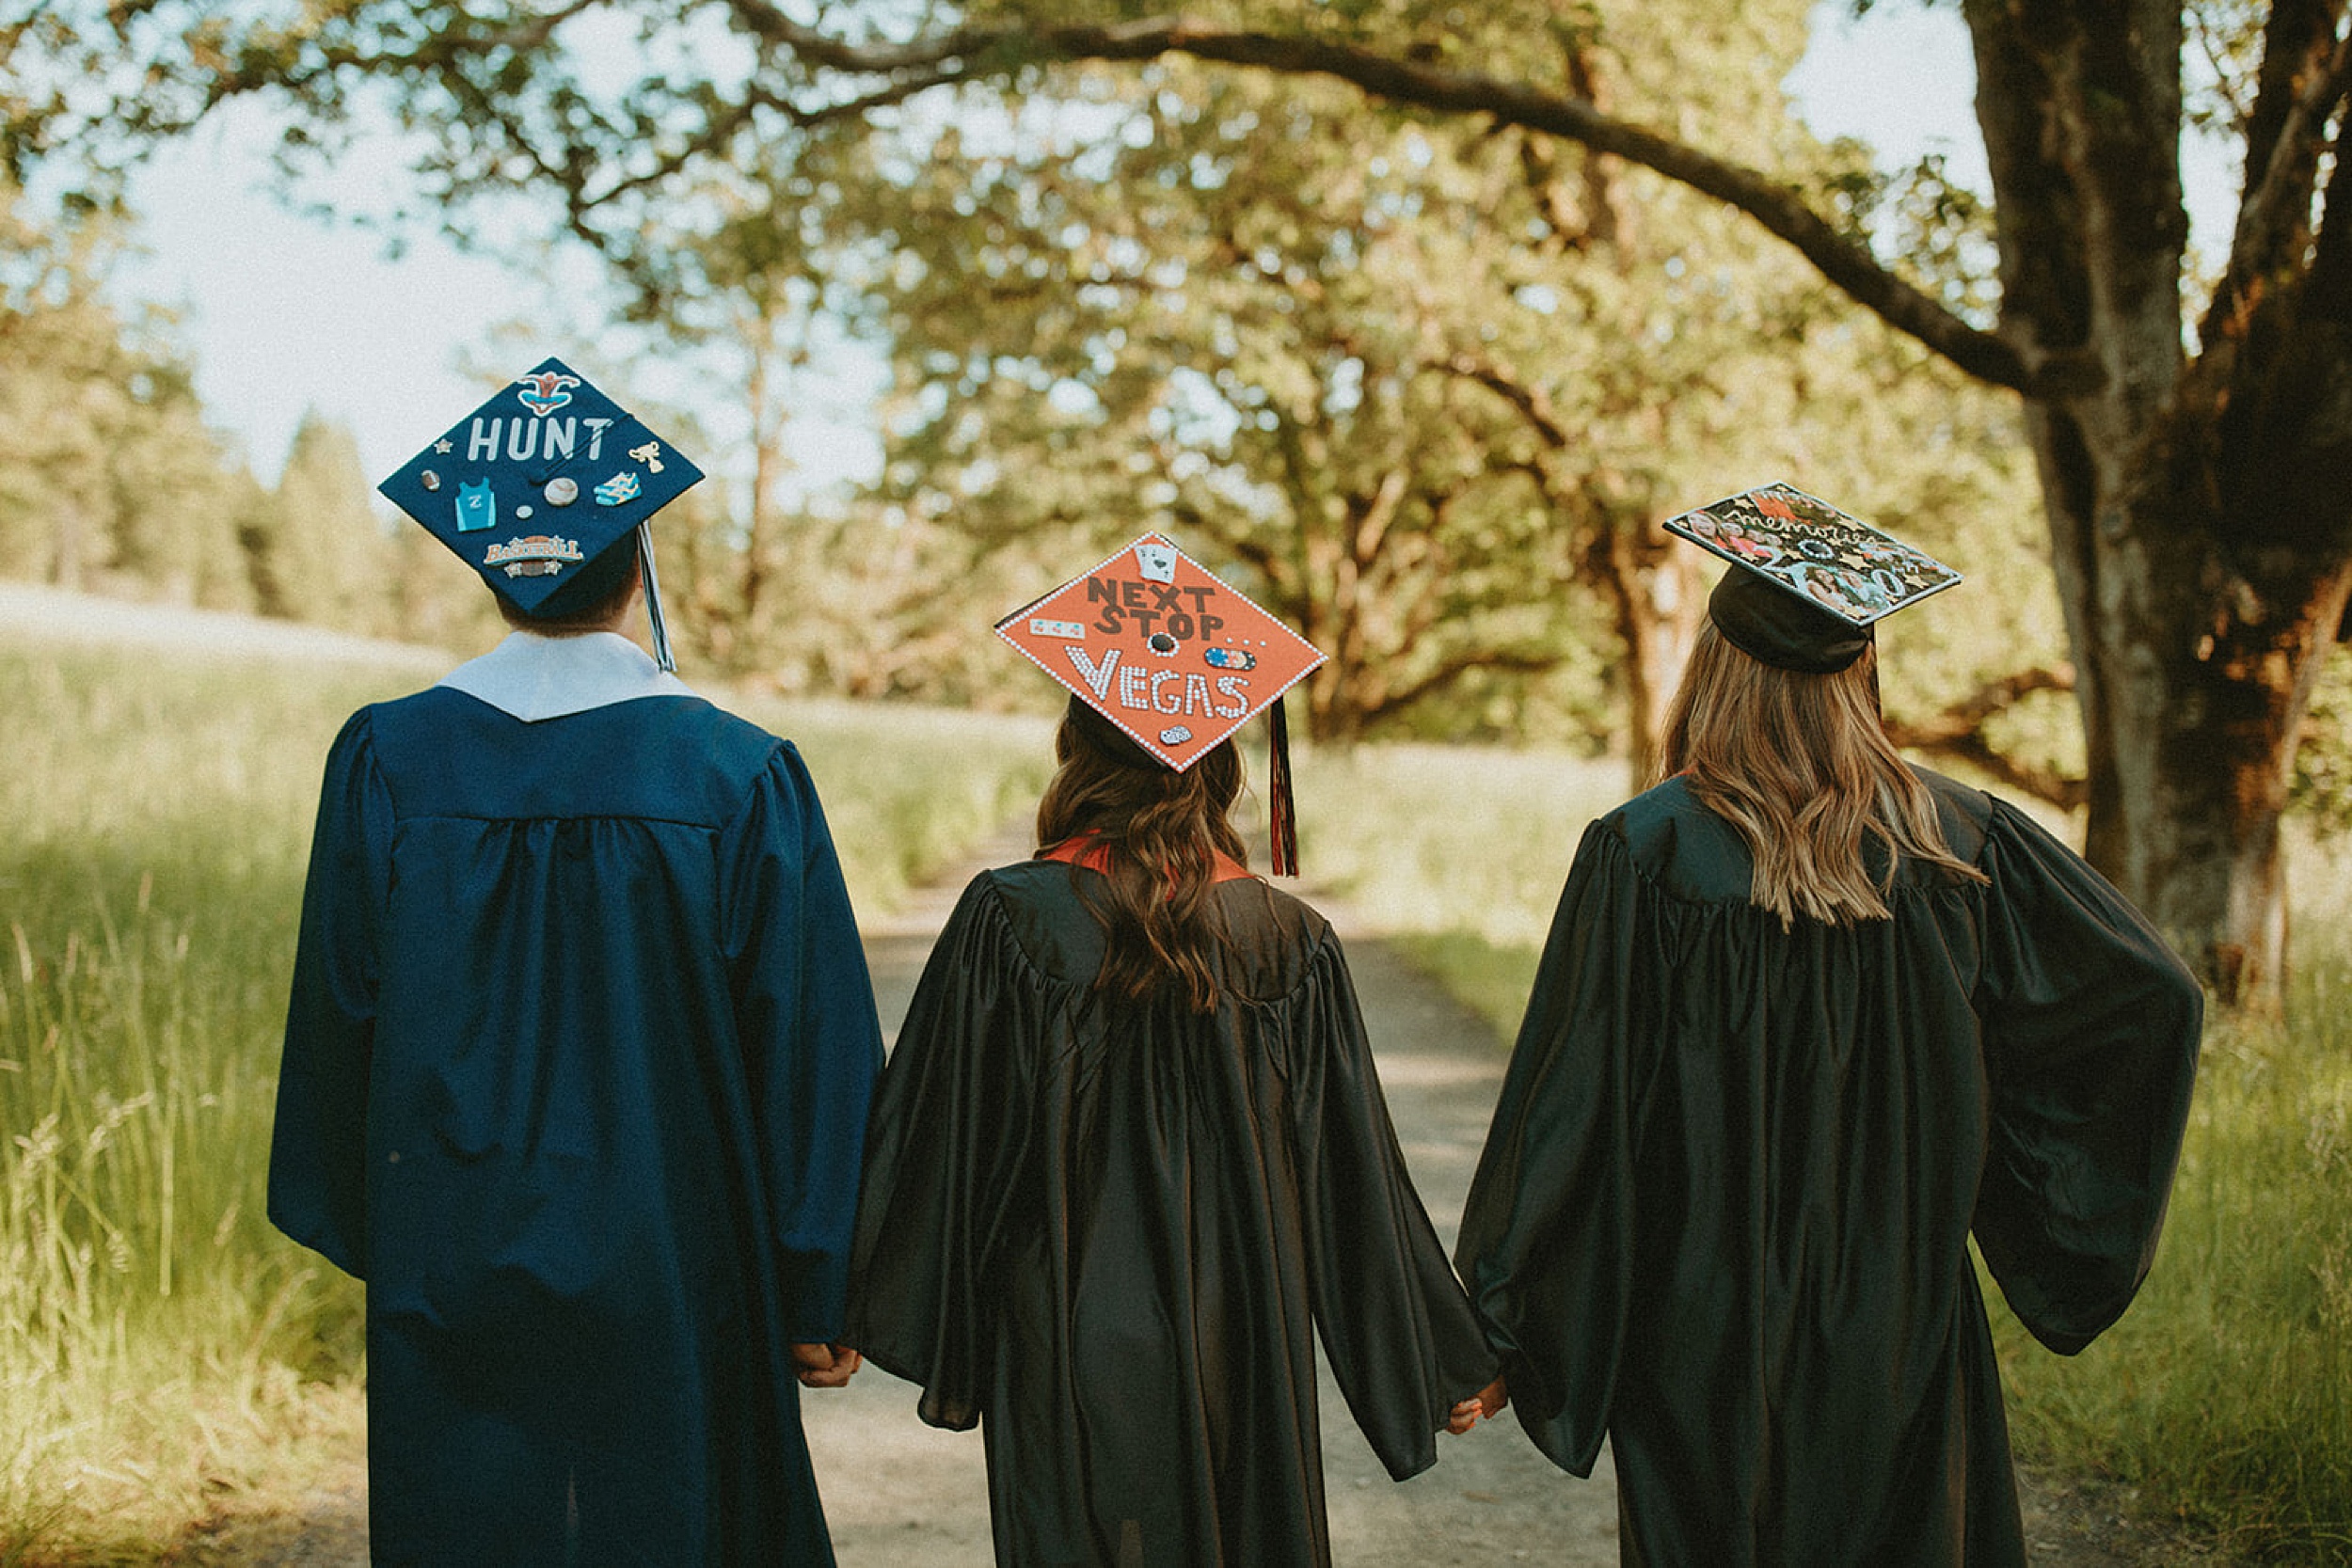 friends holding hands in their cap and gowns